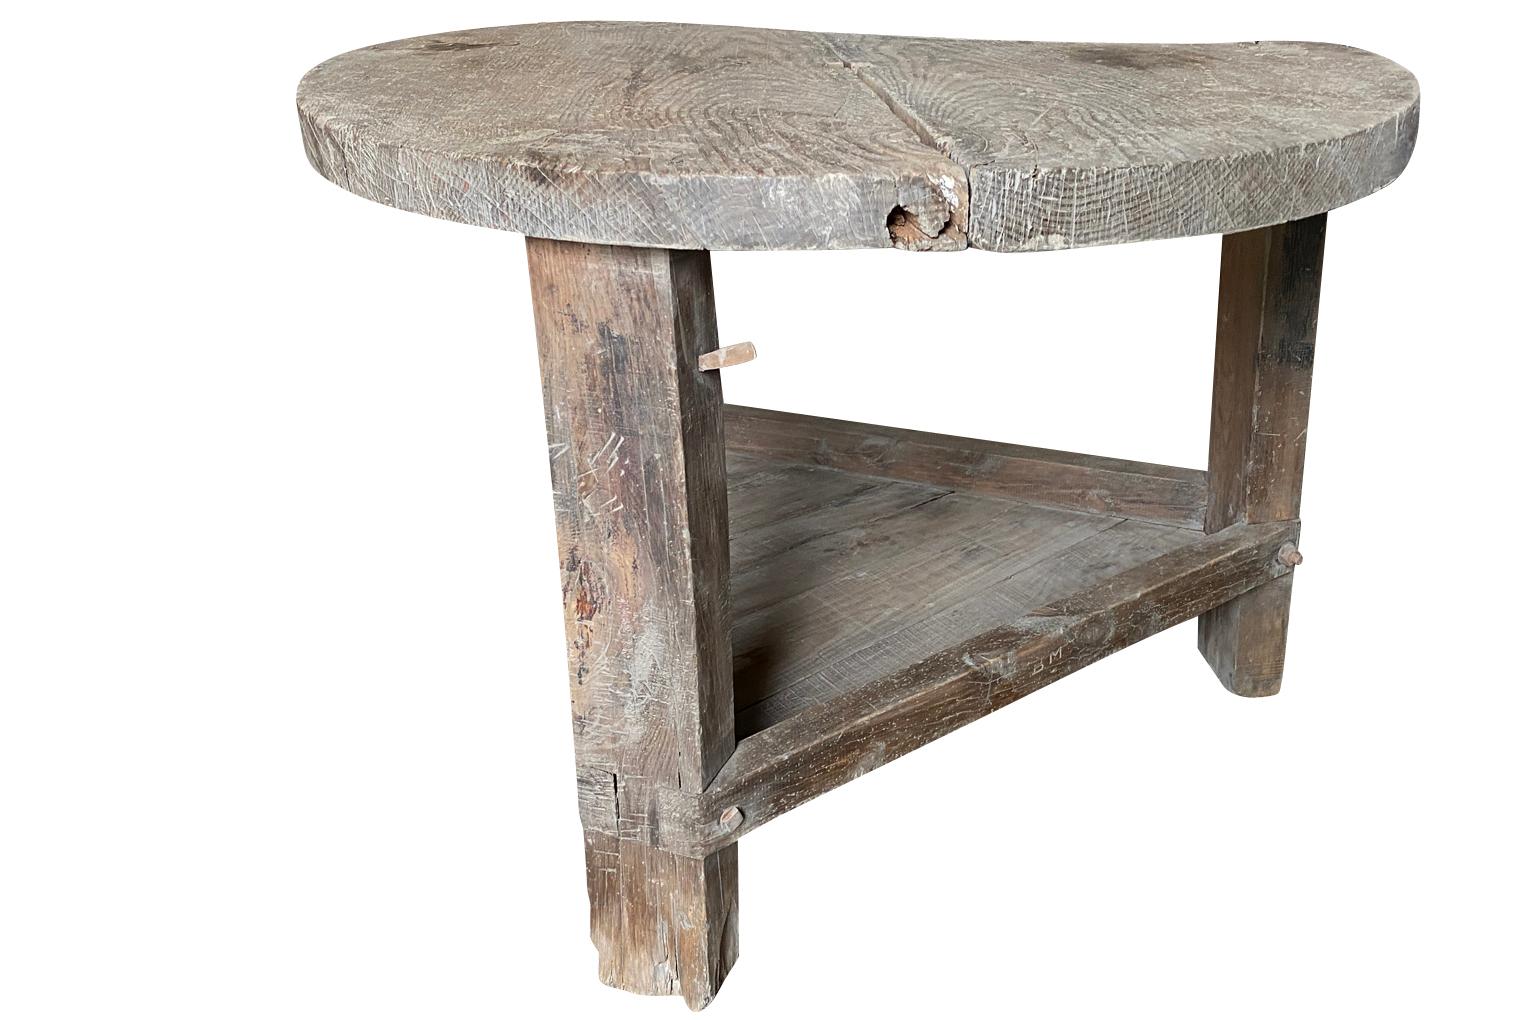 A sensational 19th century Blacksmith's Worktable from the Catalan region of Spain.  Wonderfully constructed from very thick planks of meleze - a very hard pine with a single drawer.  A perfect wine cellar piece.